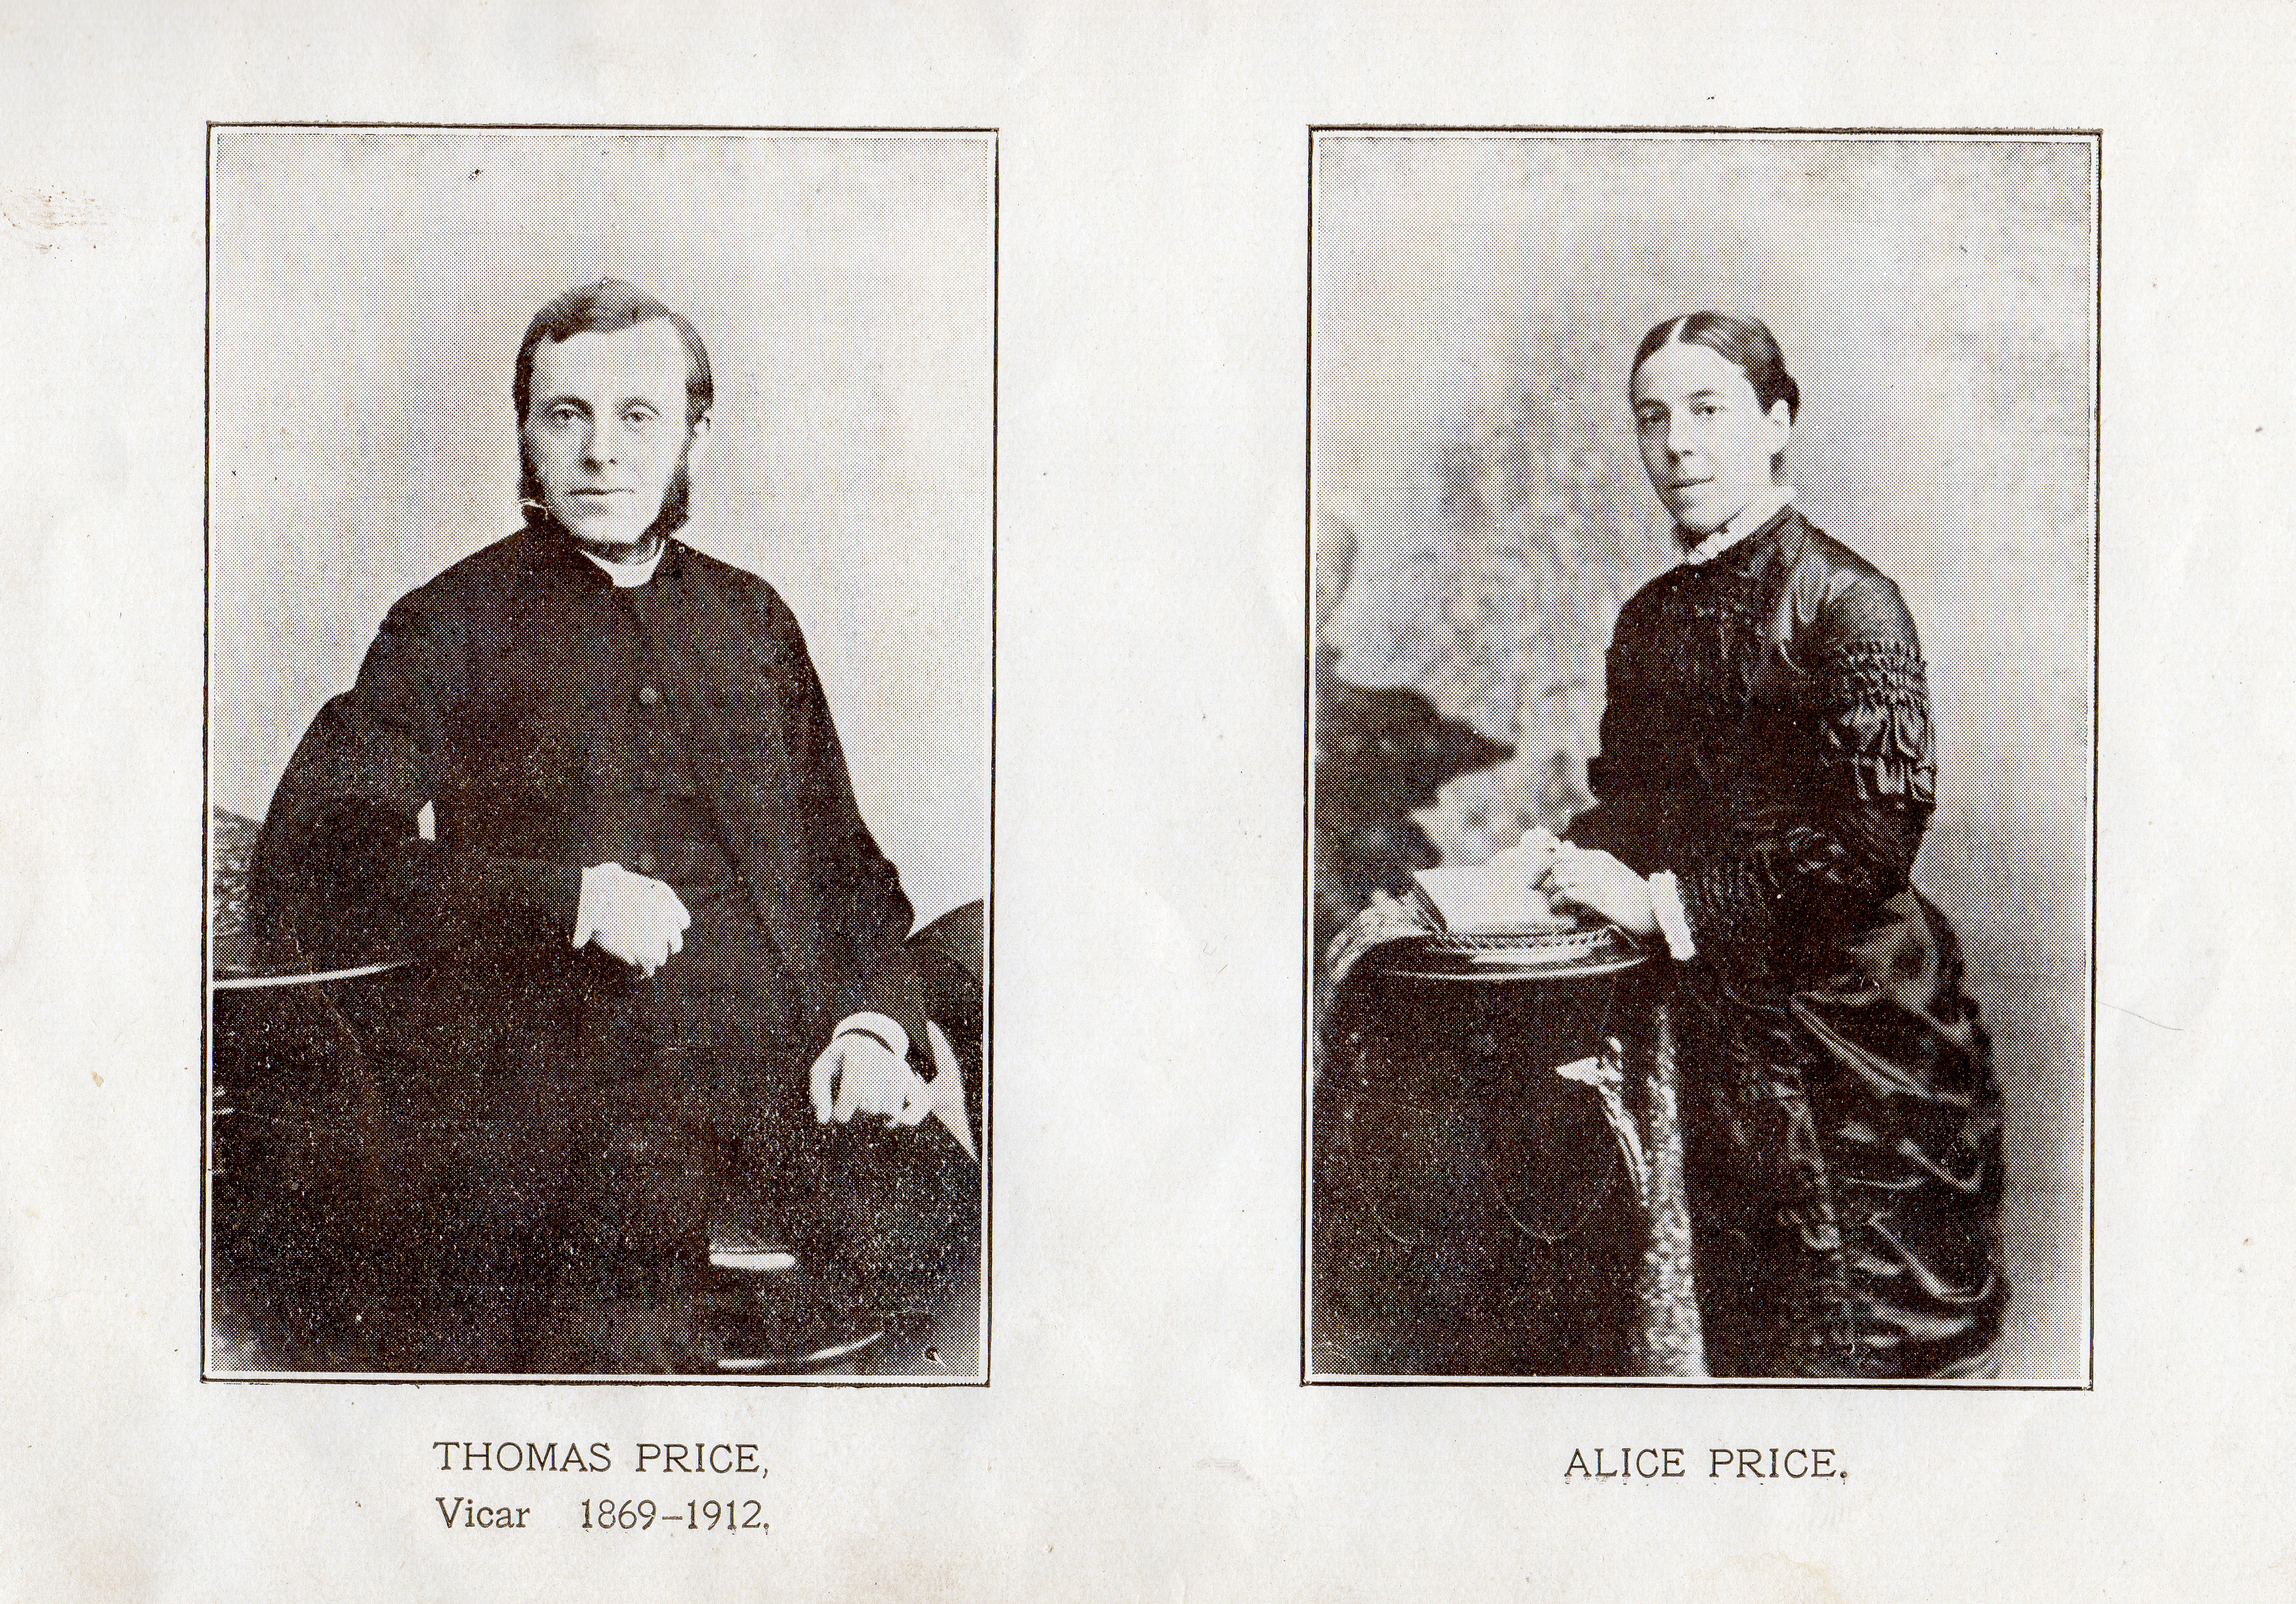  Thomas Price Vicar 1869-1912 and Alice Price.

From The Story of Layer-de-la-Haye by Mary Hopkirk. 
Cat1 Places-->Layer de la Haye